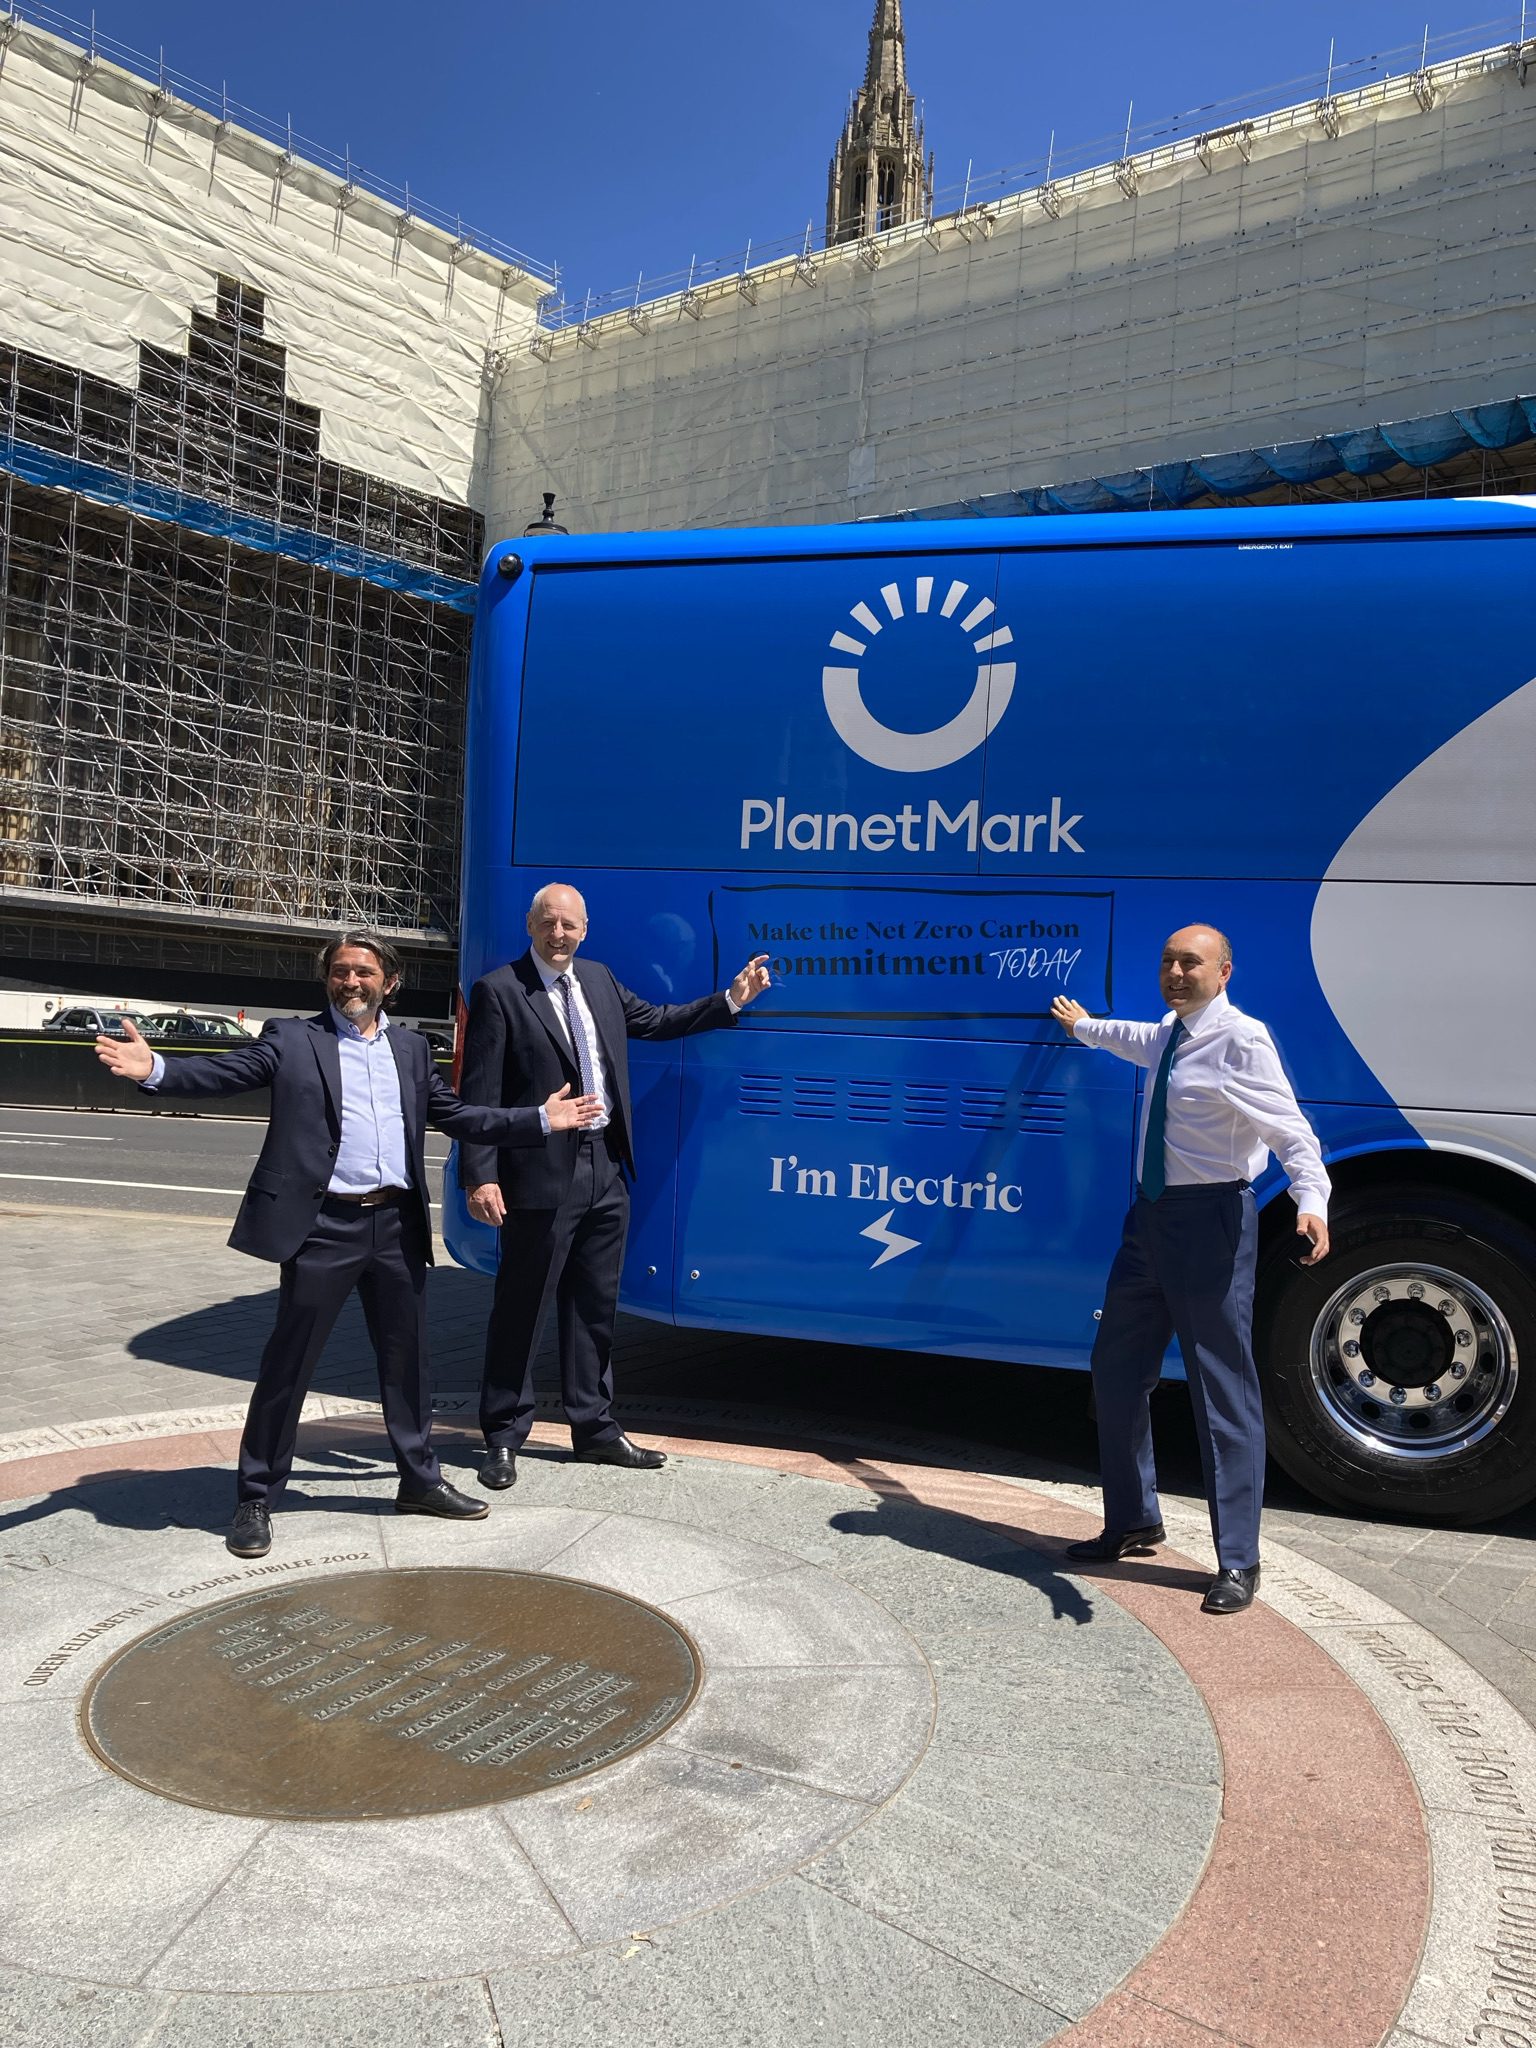 PlanetMark Carbon Tour bus outside the Houses of Parliament